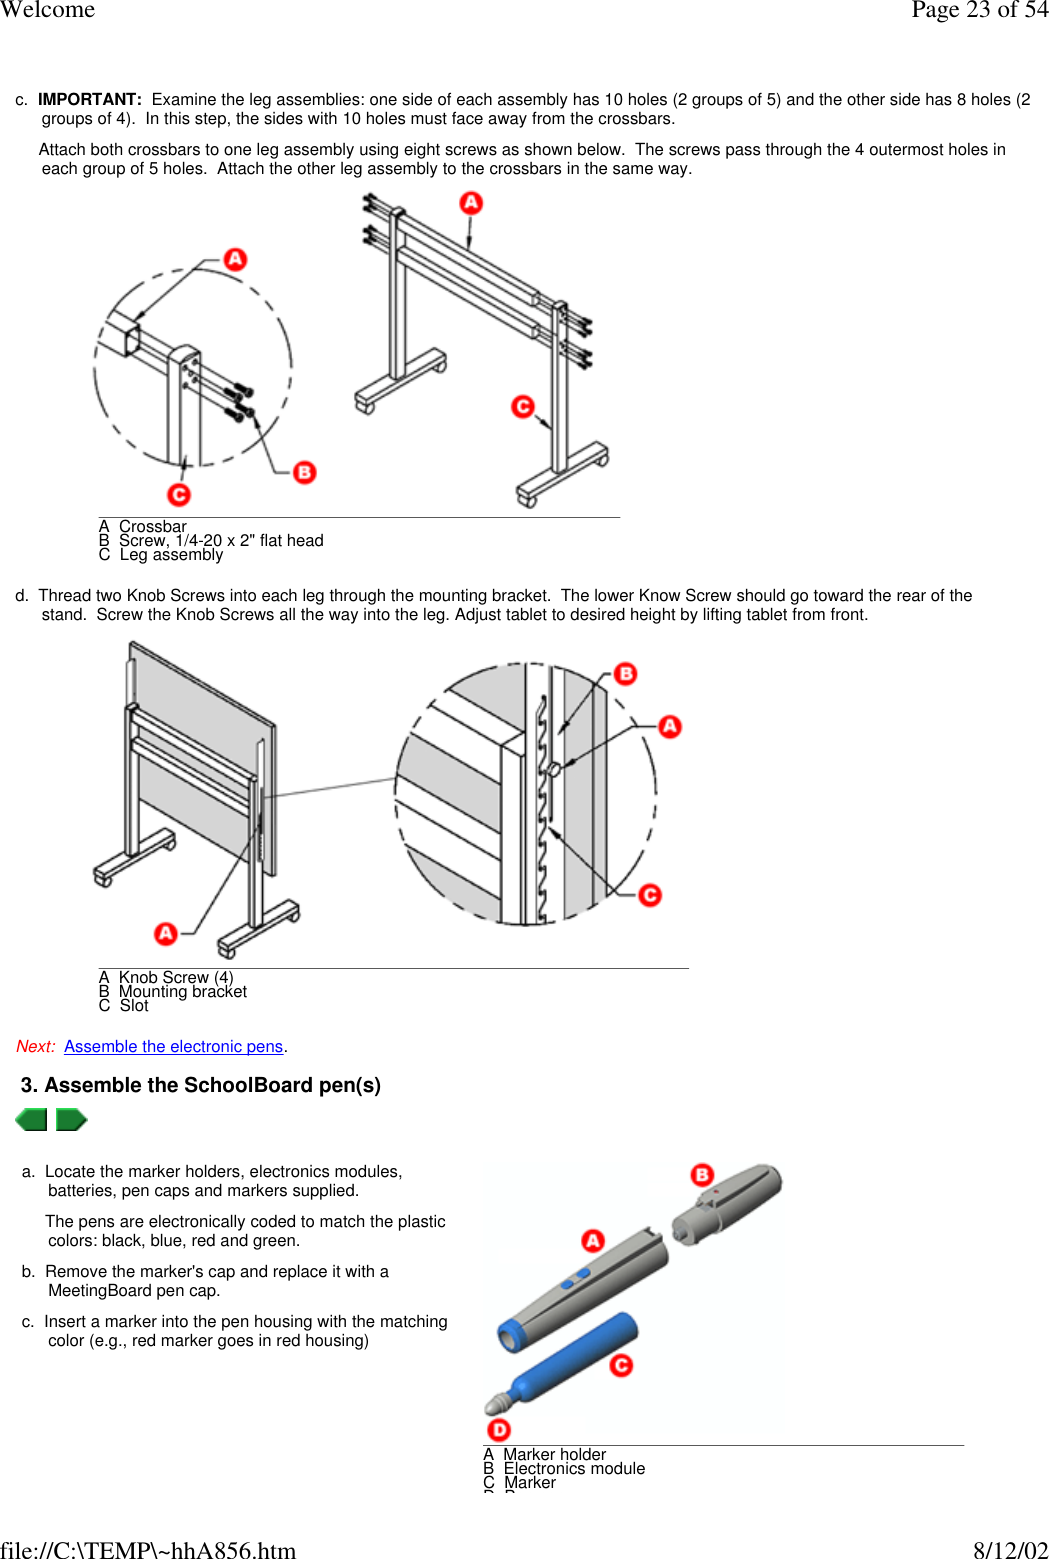 Welcome Page 23 of 54file://C:\TEMP\~hhA856.htm 8/12/02 c.  IMPORTANT:  Examine the leg assemblies: one side of each assembly has 10 holes (2 groups of 5) and the other side has 8 holes (2 groups of 4).  In this step, the sides with 10 holes must face away from the crossbars.     Attach both crossbars to one leg assembly using eight screws as shown below.  The screws pass through the 4 outermost holes in each group of 5 holes.  Attach the other leg assembly to the crossbars in the same way. d.  Thread two Knob Screws into each leg through the mounting bracket.  The lower Know Screw should go toward the rear of the stand.  Screw the Knob Screws all the way into the leg. Adjust tablet to desired height by lifting tablet from front. Next:  Assemble the electronic pens. 3. Assemble the SchoolBoard pen(s)    A  CrossbarB  Screw, 1/4-20 x 2&quot; flat headC  Leg assembly A  Knob Screw (4)B  Mounting bracketC  Slota.  Locate the marker holders, electronics modules, batteries, pen caps and markers supplied.     The pens are electronically coded to match the plastic colors: black, blue, red and green.b.  Remove the marker&apos;s cap and replace it with a MeetingBoard pen cap.c.  Insert a marker into the pen housing with the matching color (e.g., red marker goes in red housing)A  Marker holderB  Electronics moduleC  MarkerD  Pen cap